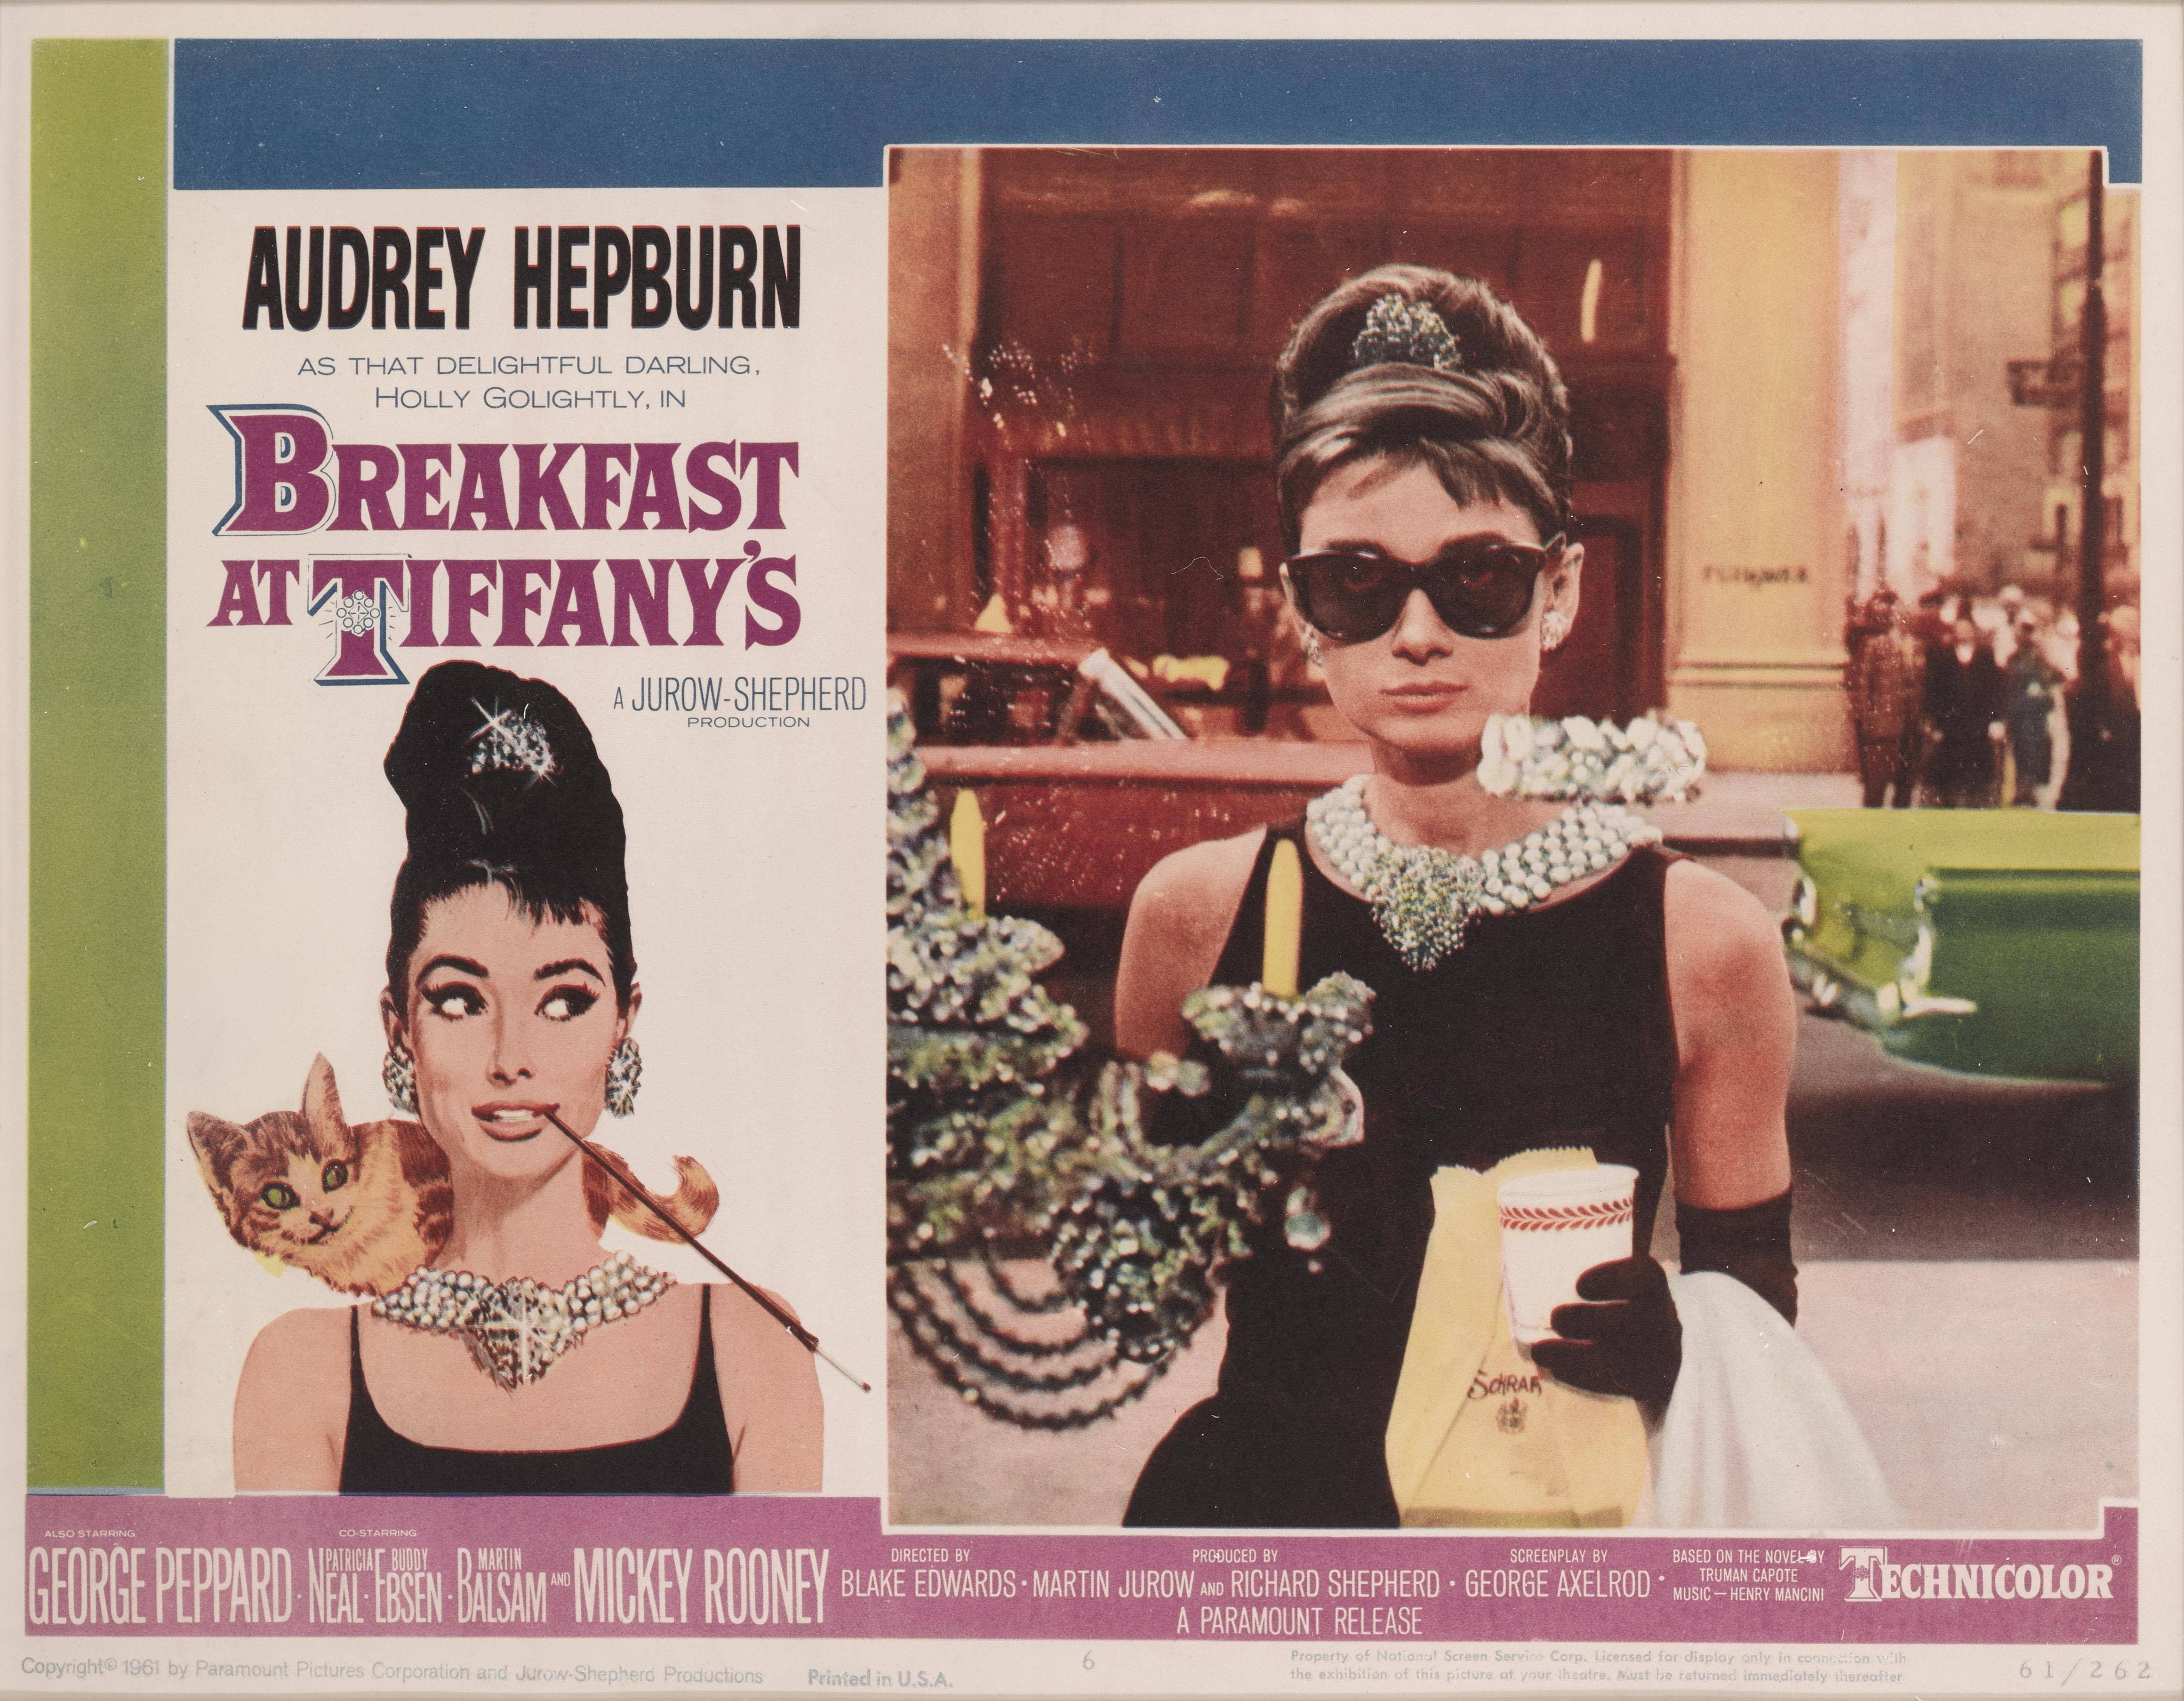 Original US Lobby card number 6 designed for the legendary 1961 Audrey Hepburn Comedy, Romance. This is the best card from the set of 8 lobby cards.
This film was directed by Blake Edwards, and stars Audrey Hepburn and George Peppard. This is